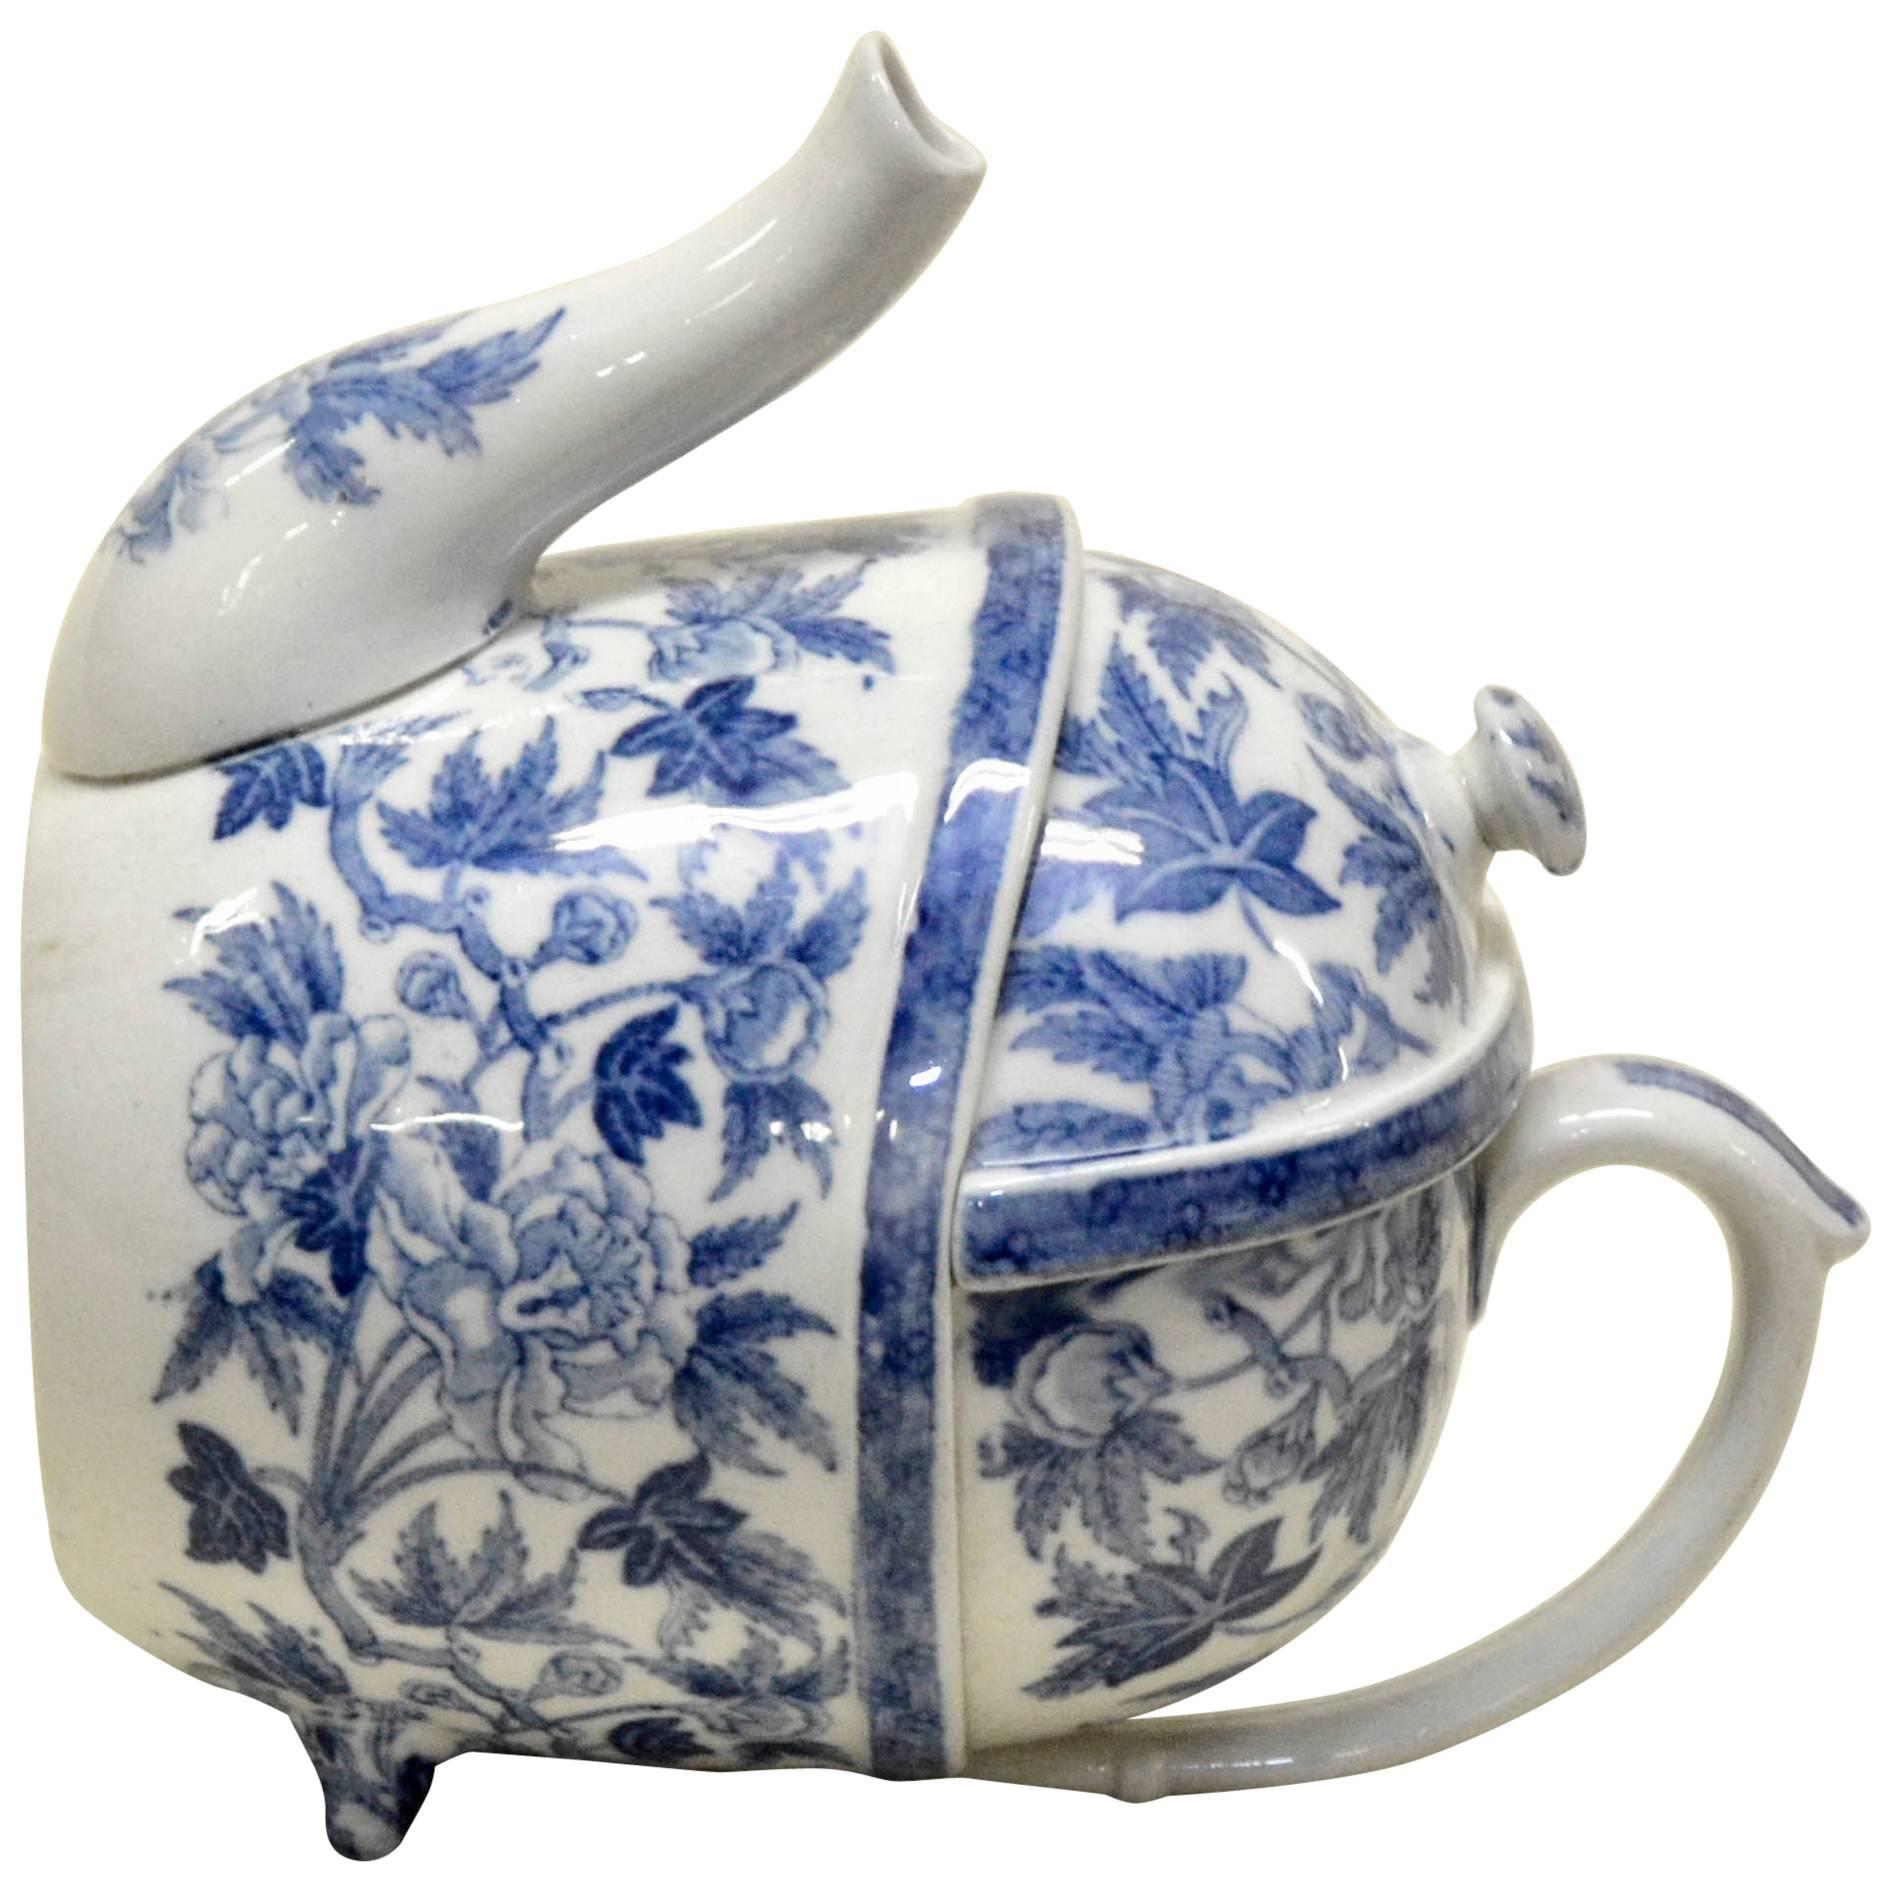 1900s S.YP. Simple Yet Perfect Peony Wedgwood Patent Teapot Made in England